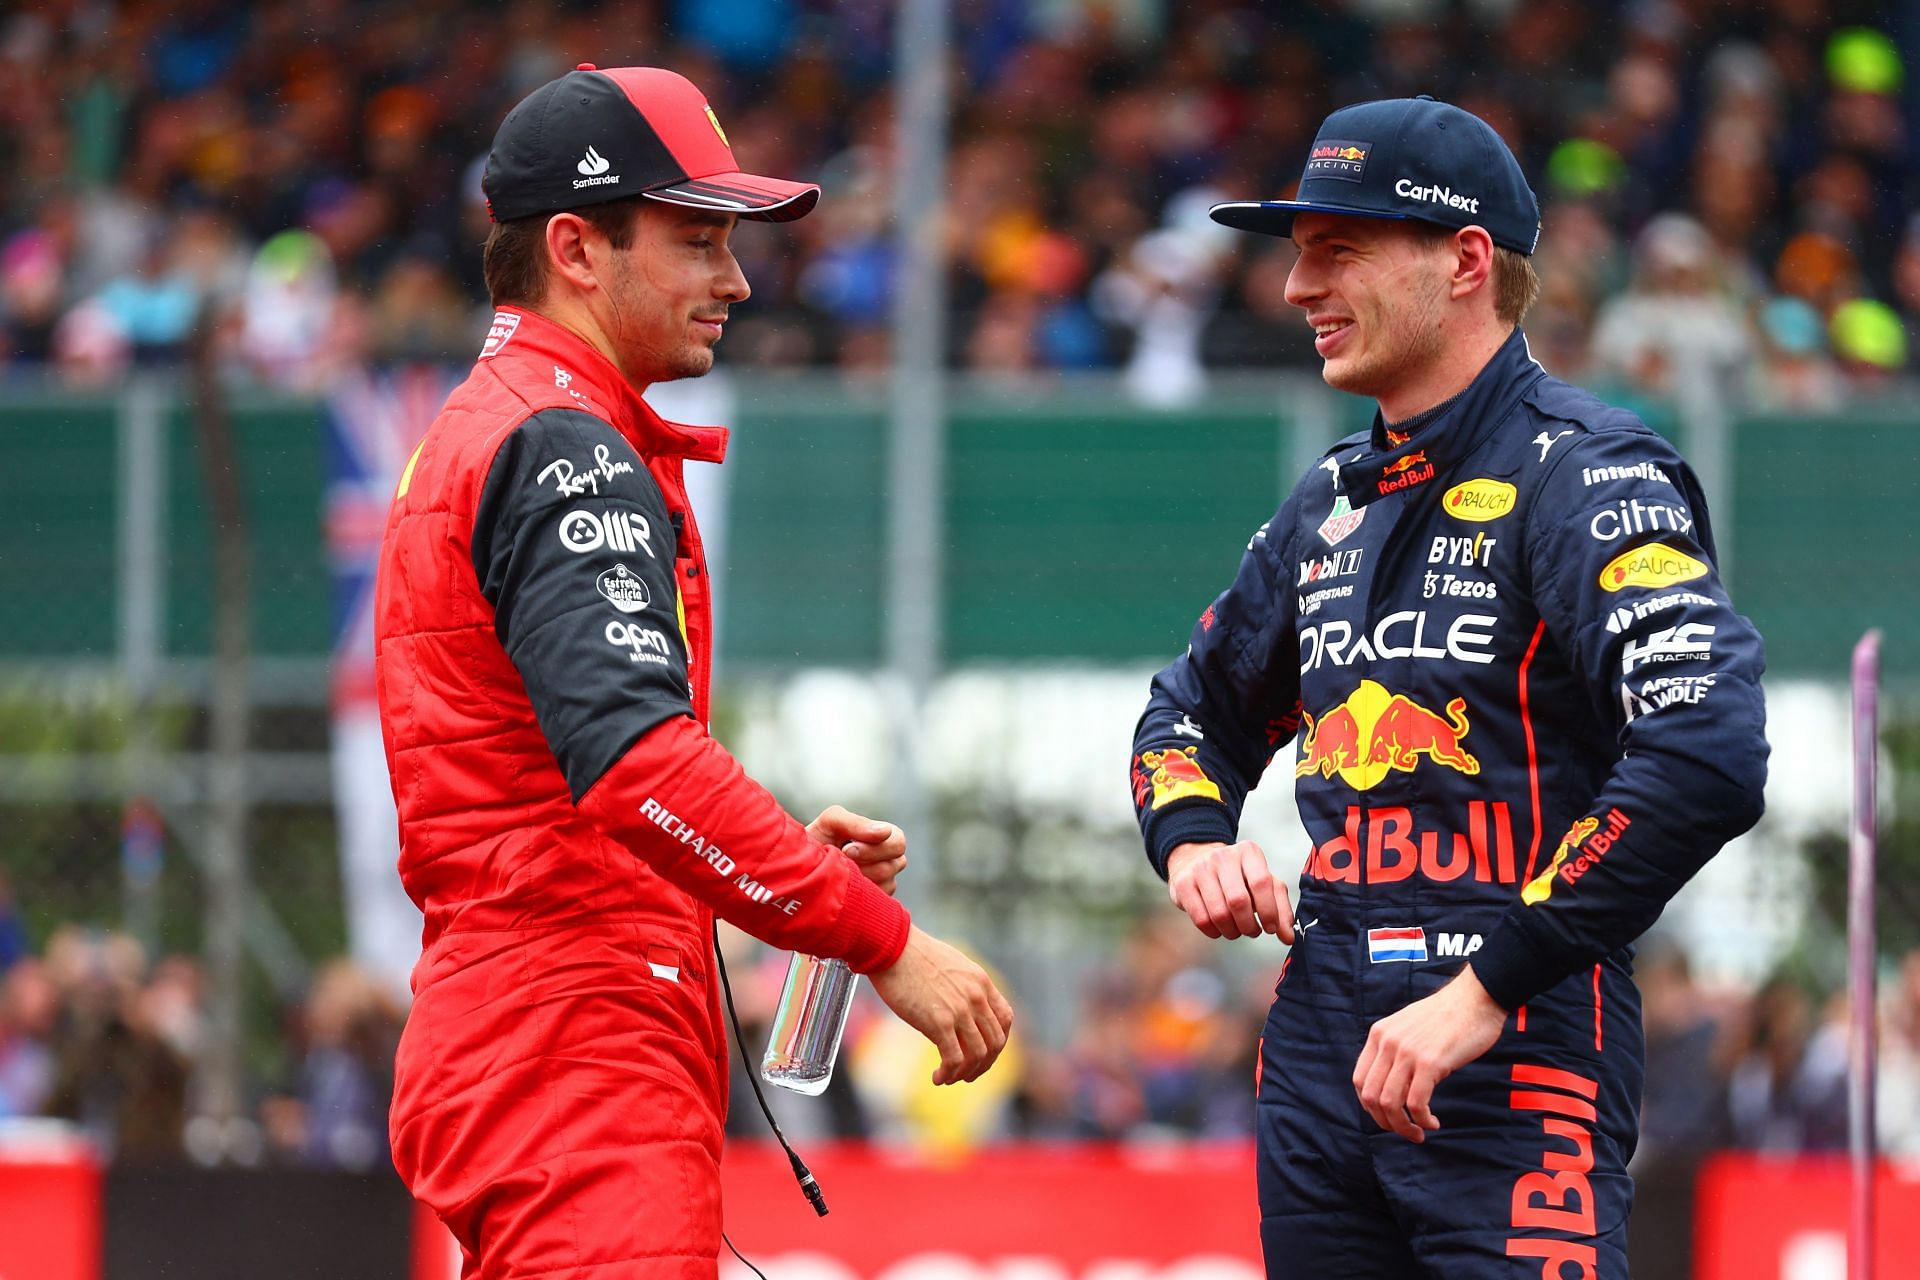 Charles Leclerc and Max Verstappen talk in parc ferme during qualifying ahead of the F1 Grand Prix of Great Britain at Silverstone on July 02, 2022, in Northampton, England (Photo by Mark Thompson/Getty Images)